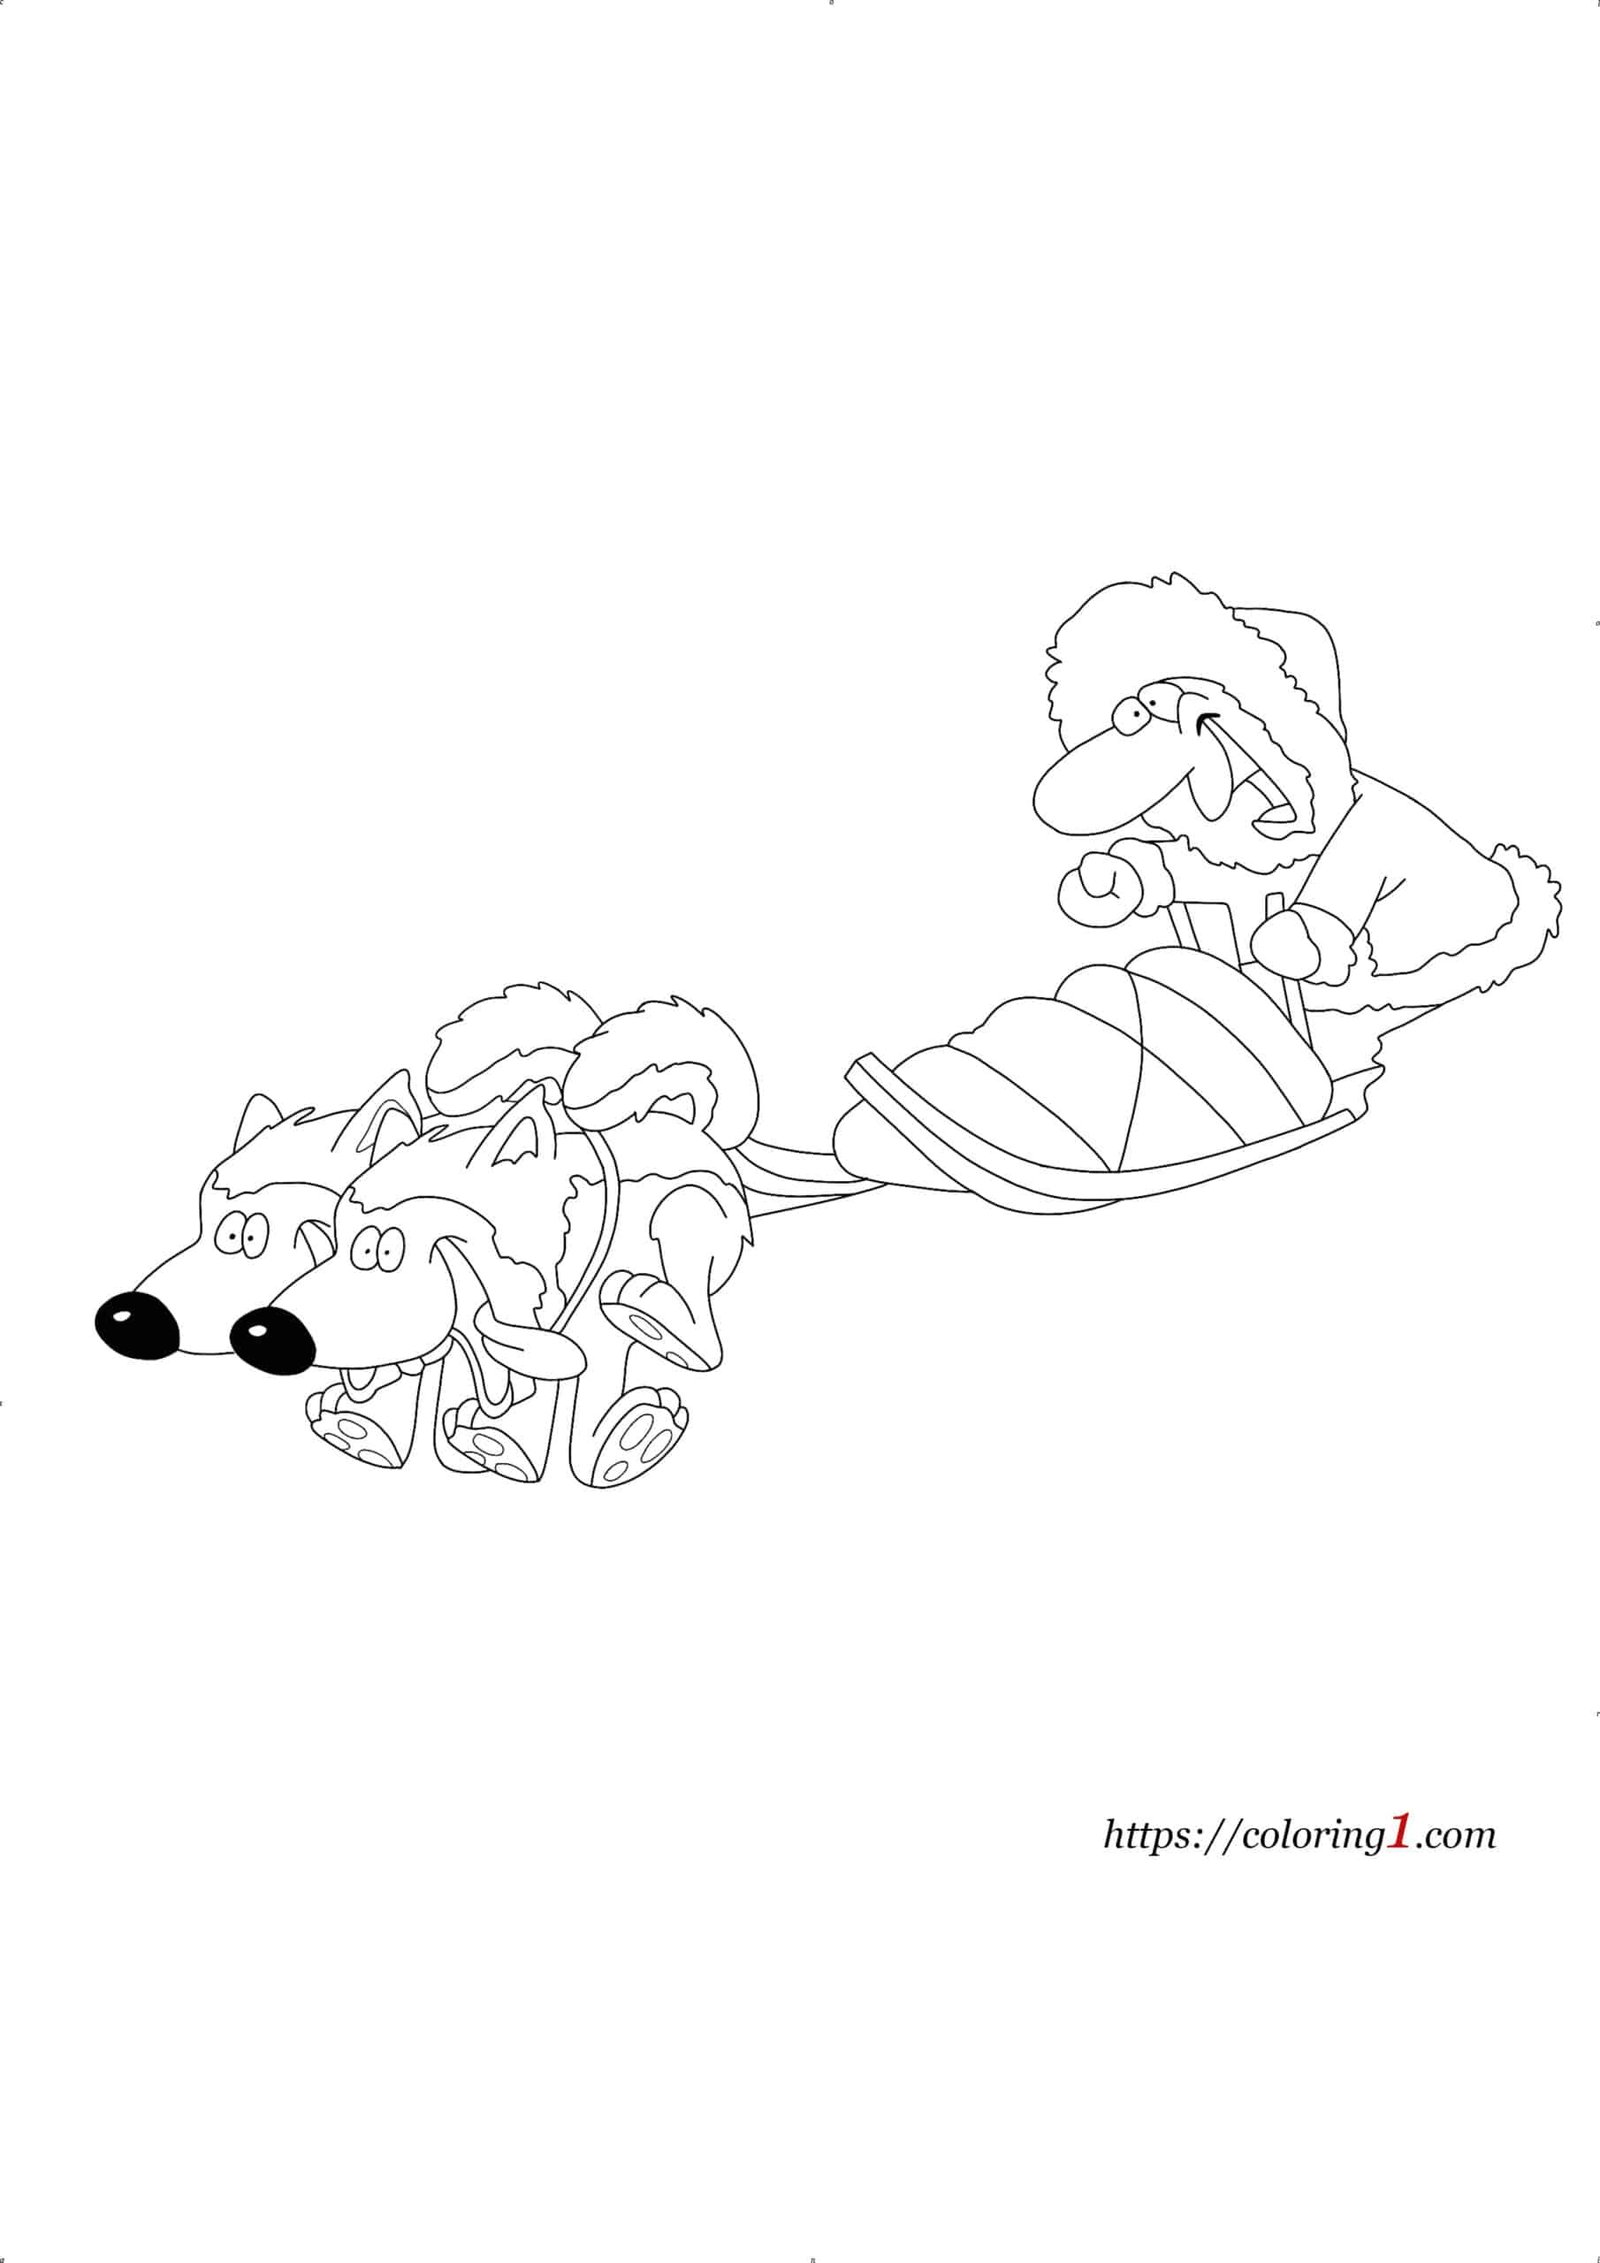 Dog Sled Race coloring page